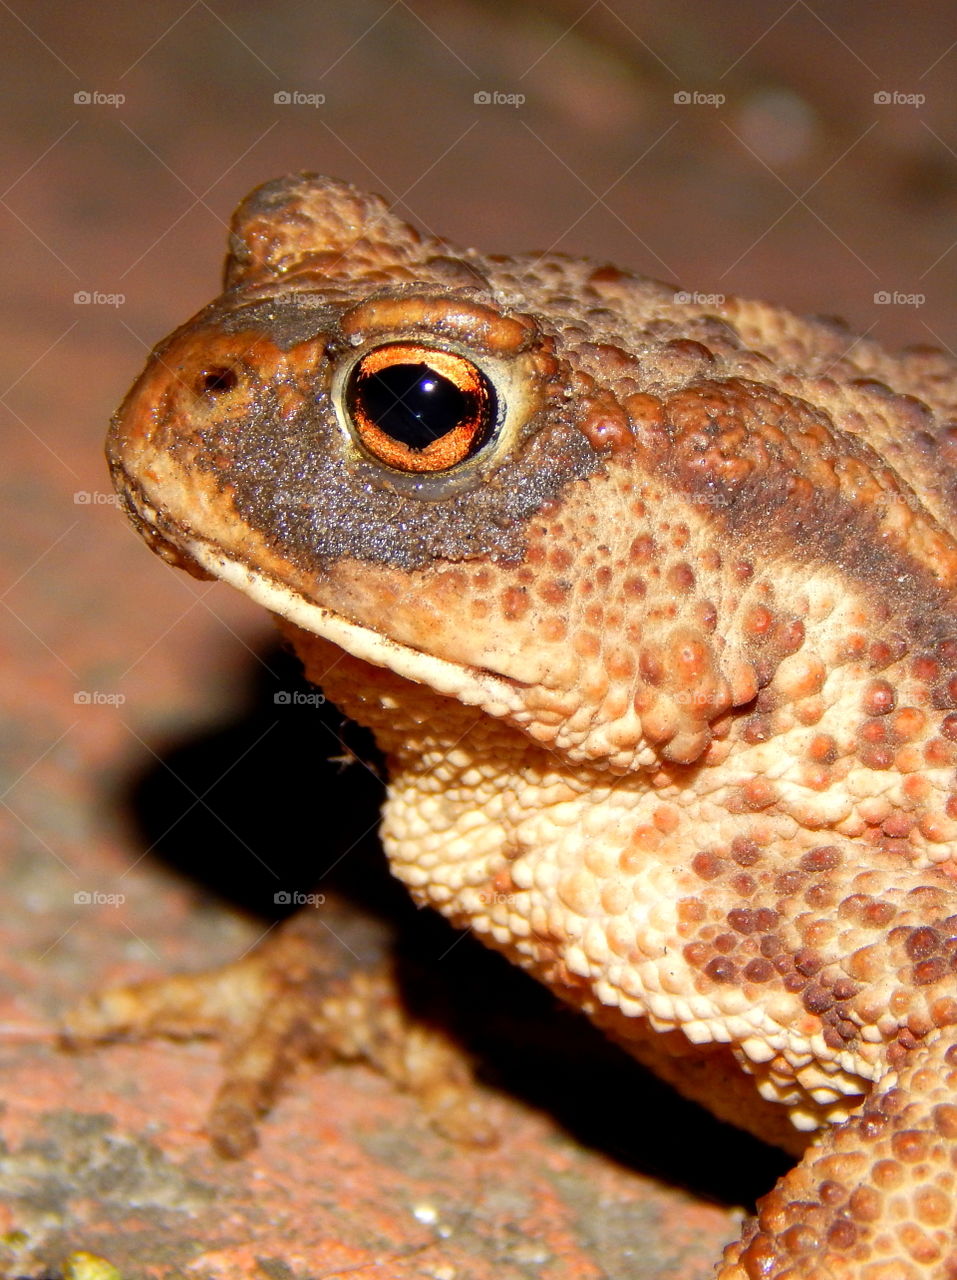 Brown frog with gold eyes